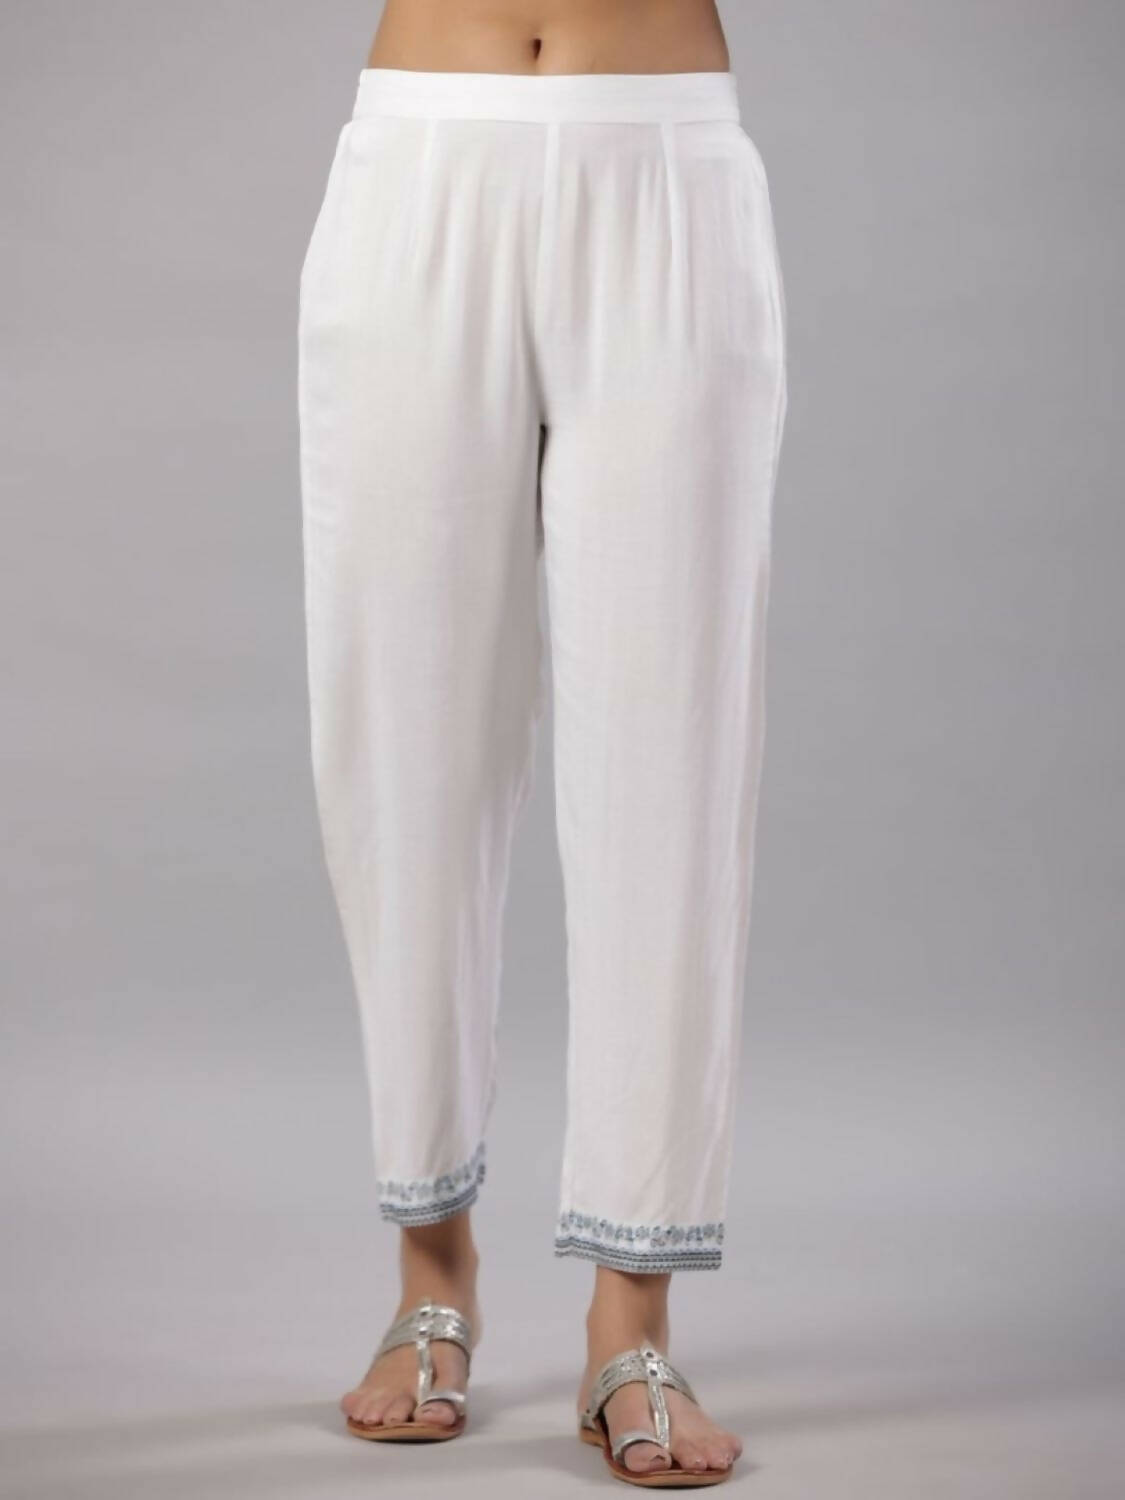 Palazzo Pants – look chic feel comfy this summer